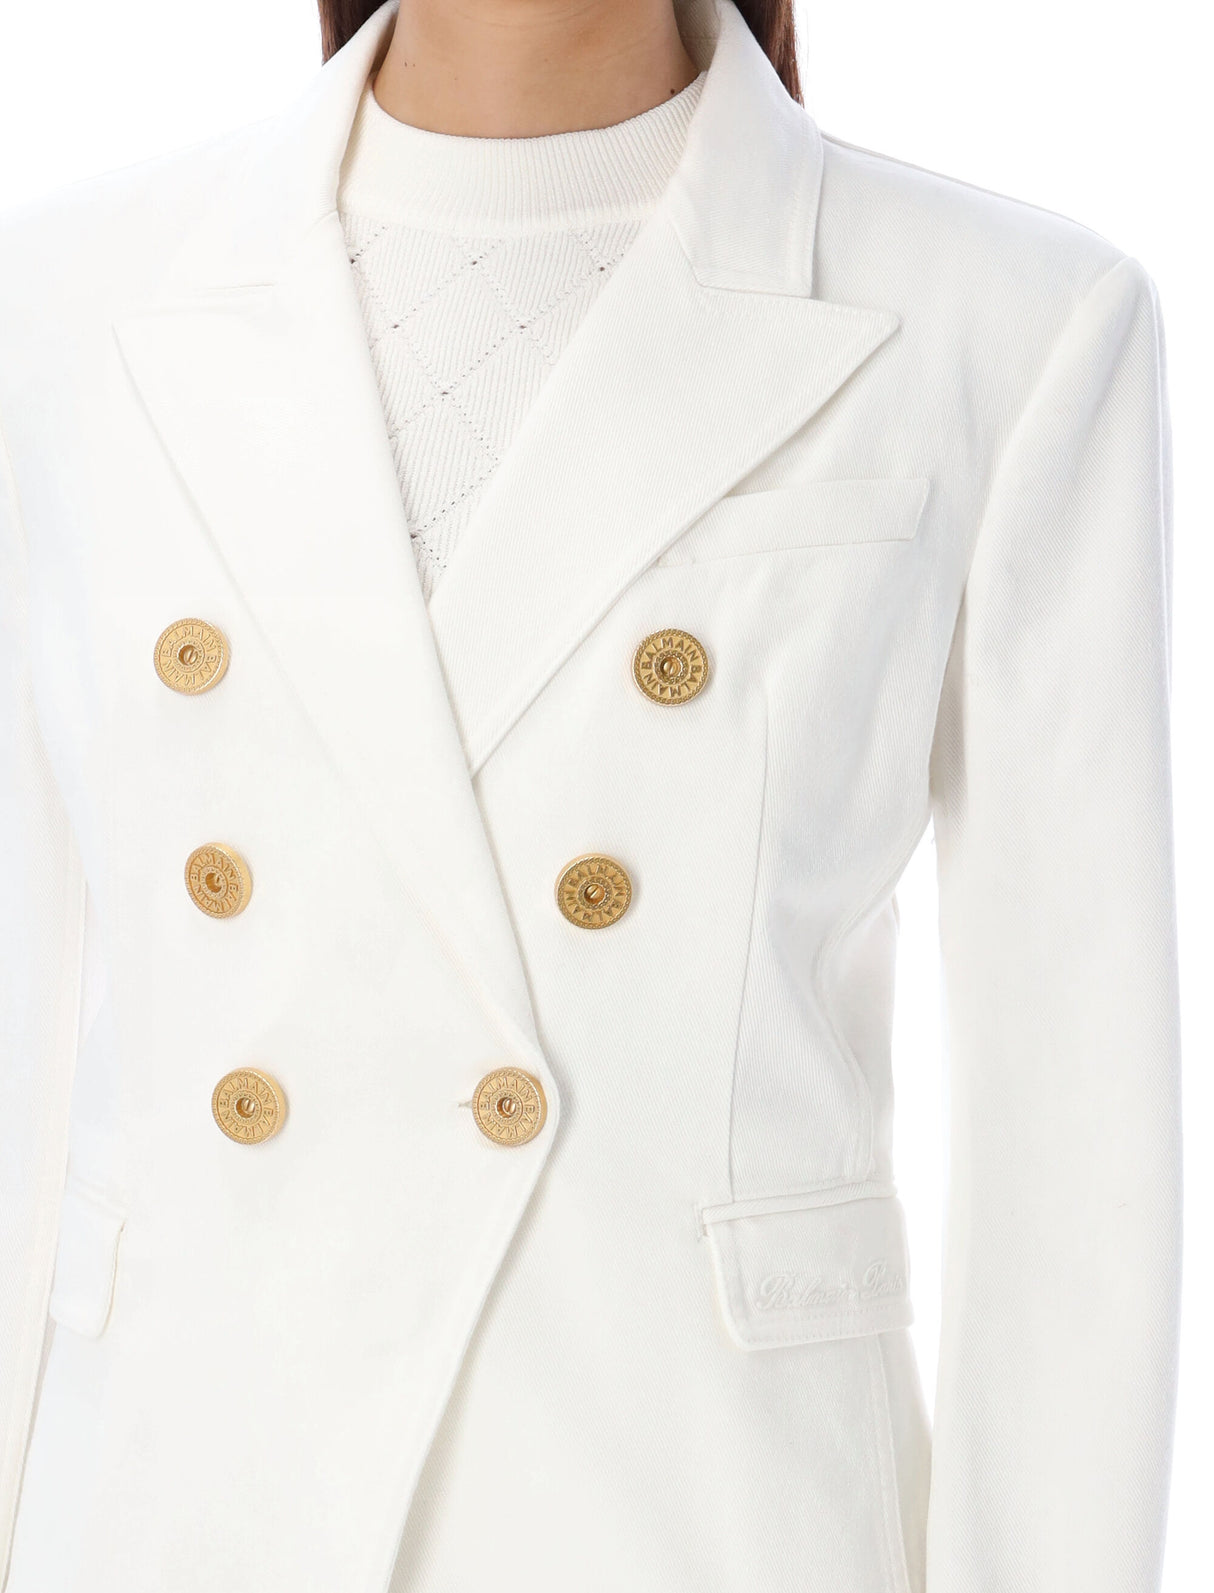 BALMAIN Stylish and Chic 6-Button Denim Jacket for Women in White